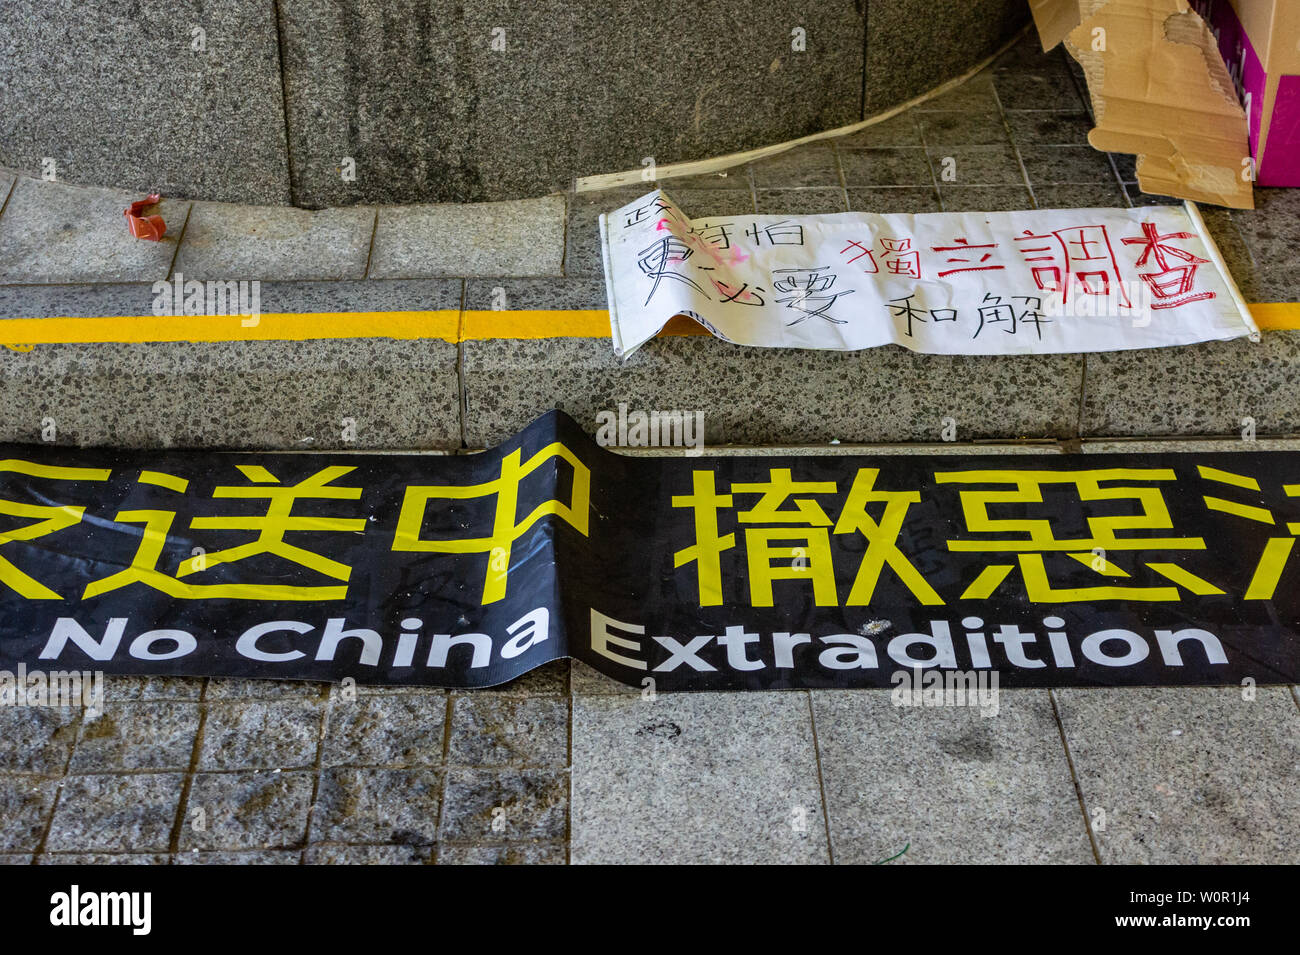 Hong Kong 2019 extradition bill protest : protesters signs Stock Photo